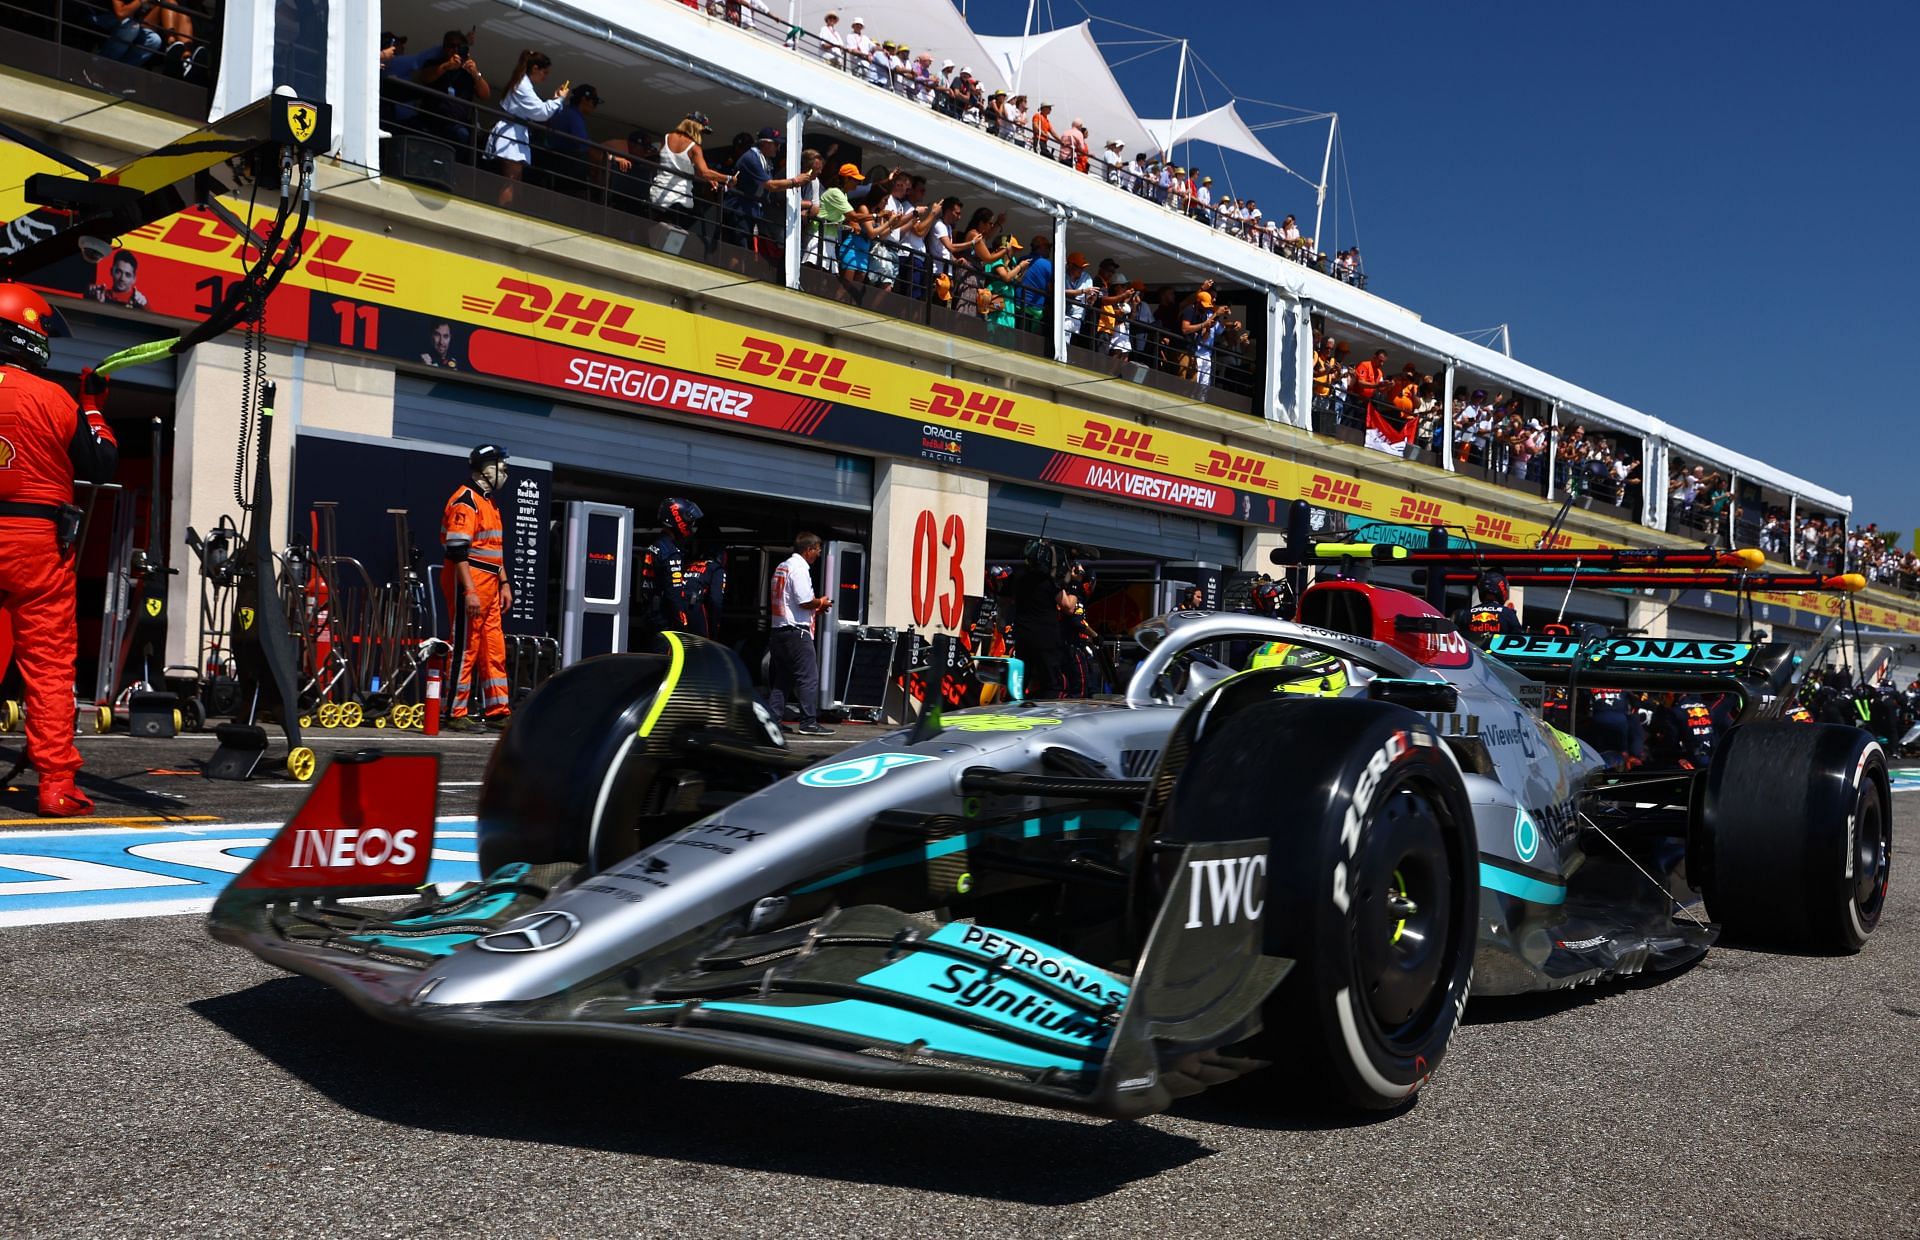 The Mercedes W13 in the pitlane during the F1 Grand Prix of France at Circuit Paul Ricard on July 24, 2022, in Le Castellet, France. (Photo by Mark Thompson/Getty Images)